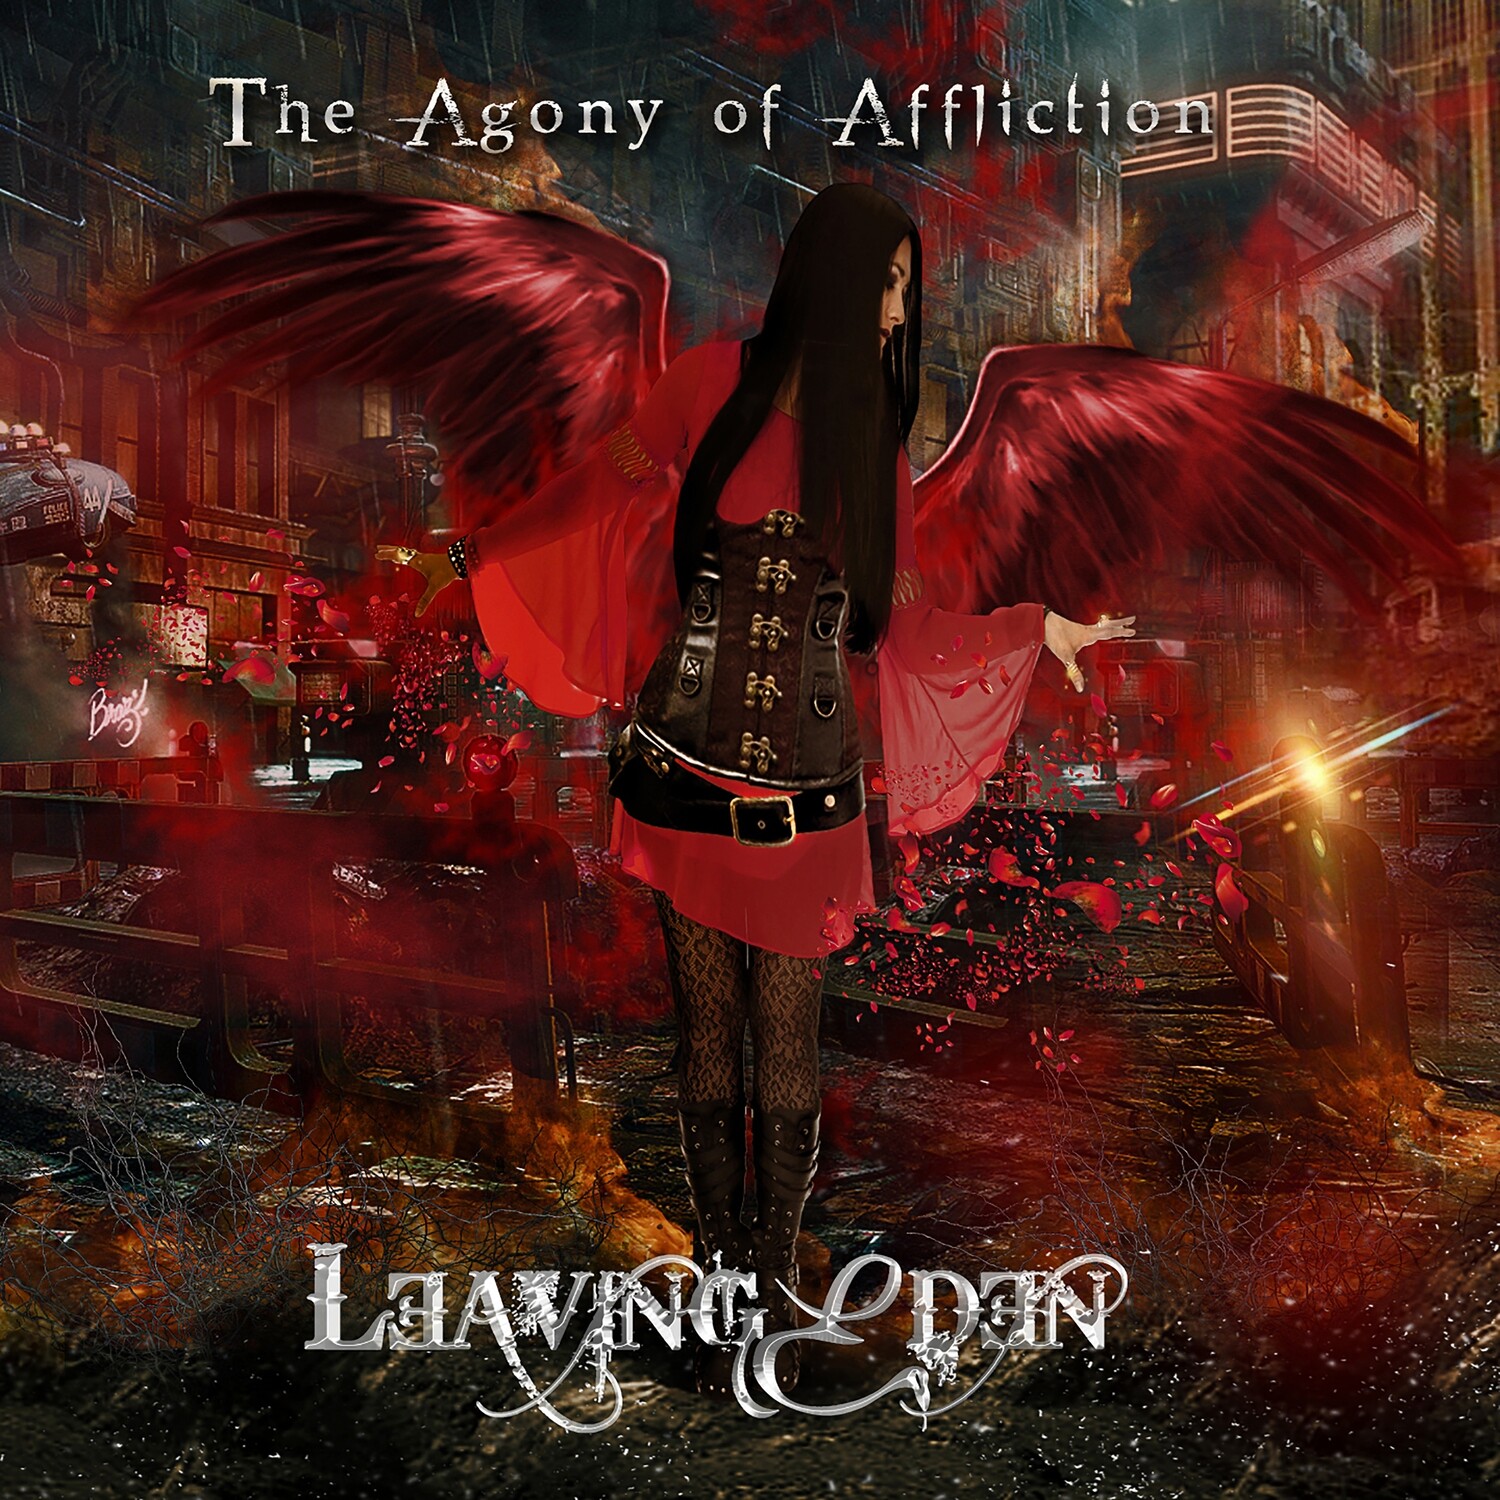 The Agony of Affliction by Leaving Eden [CD]